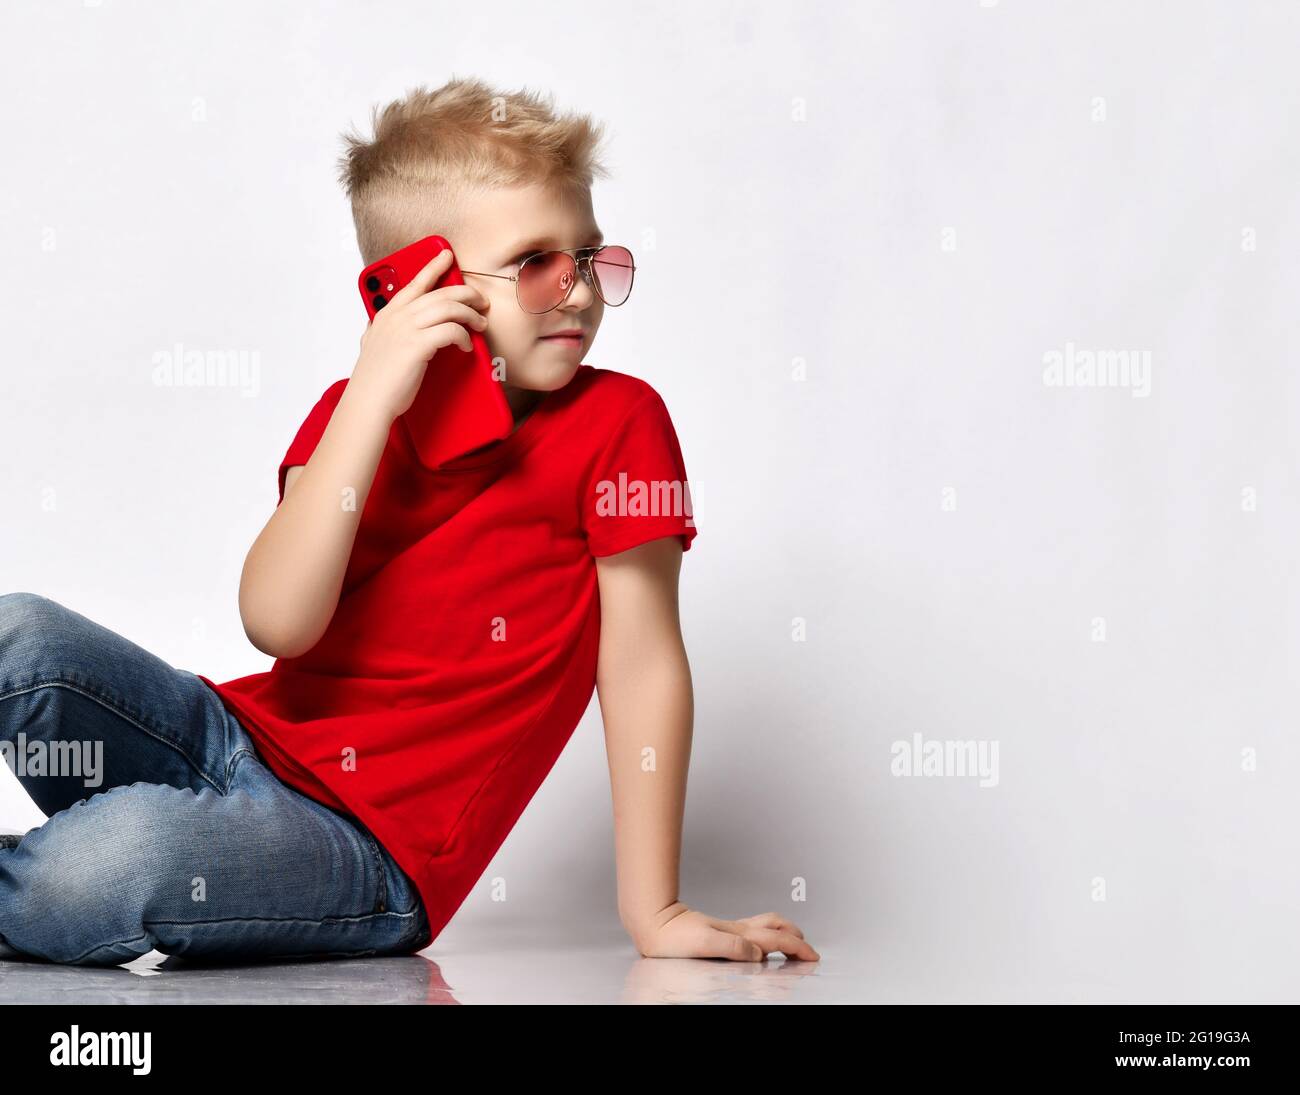 Stylish kid boy child in red t-shirt, jeans, sneakers and sunglasses sitting on floor talking on smartphone looking away Stock Photo